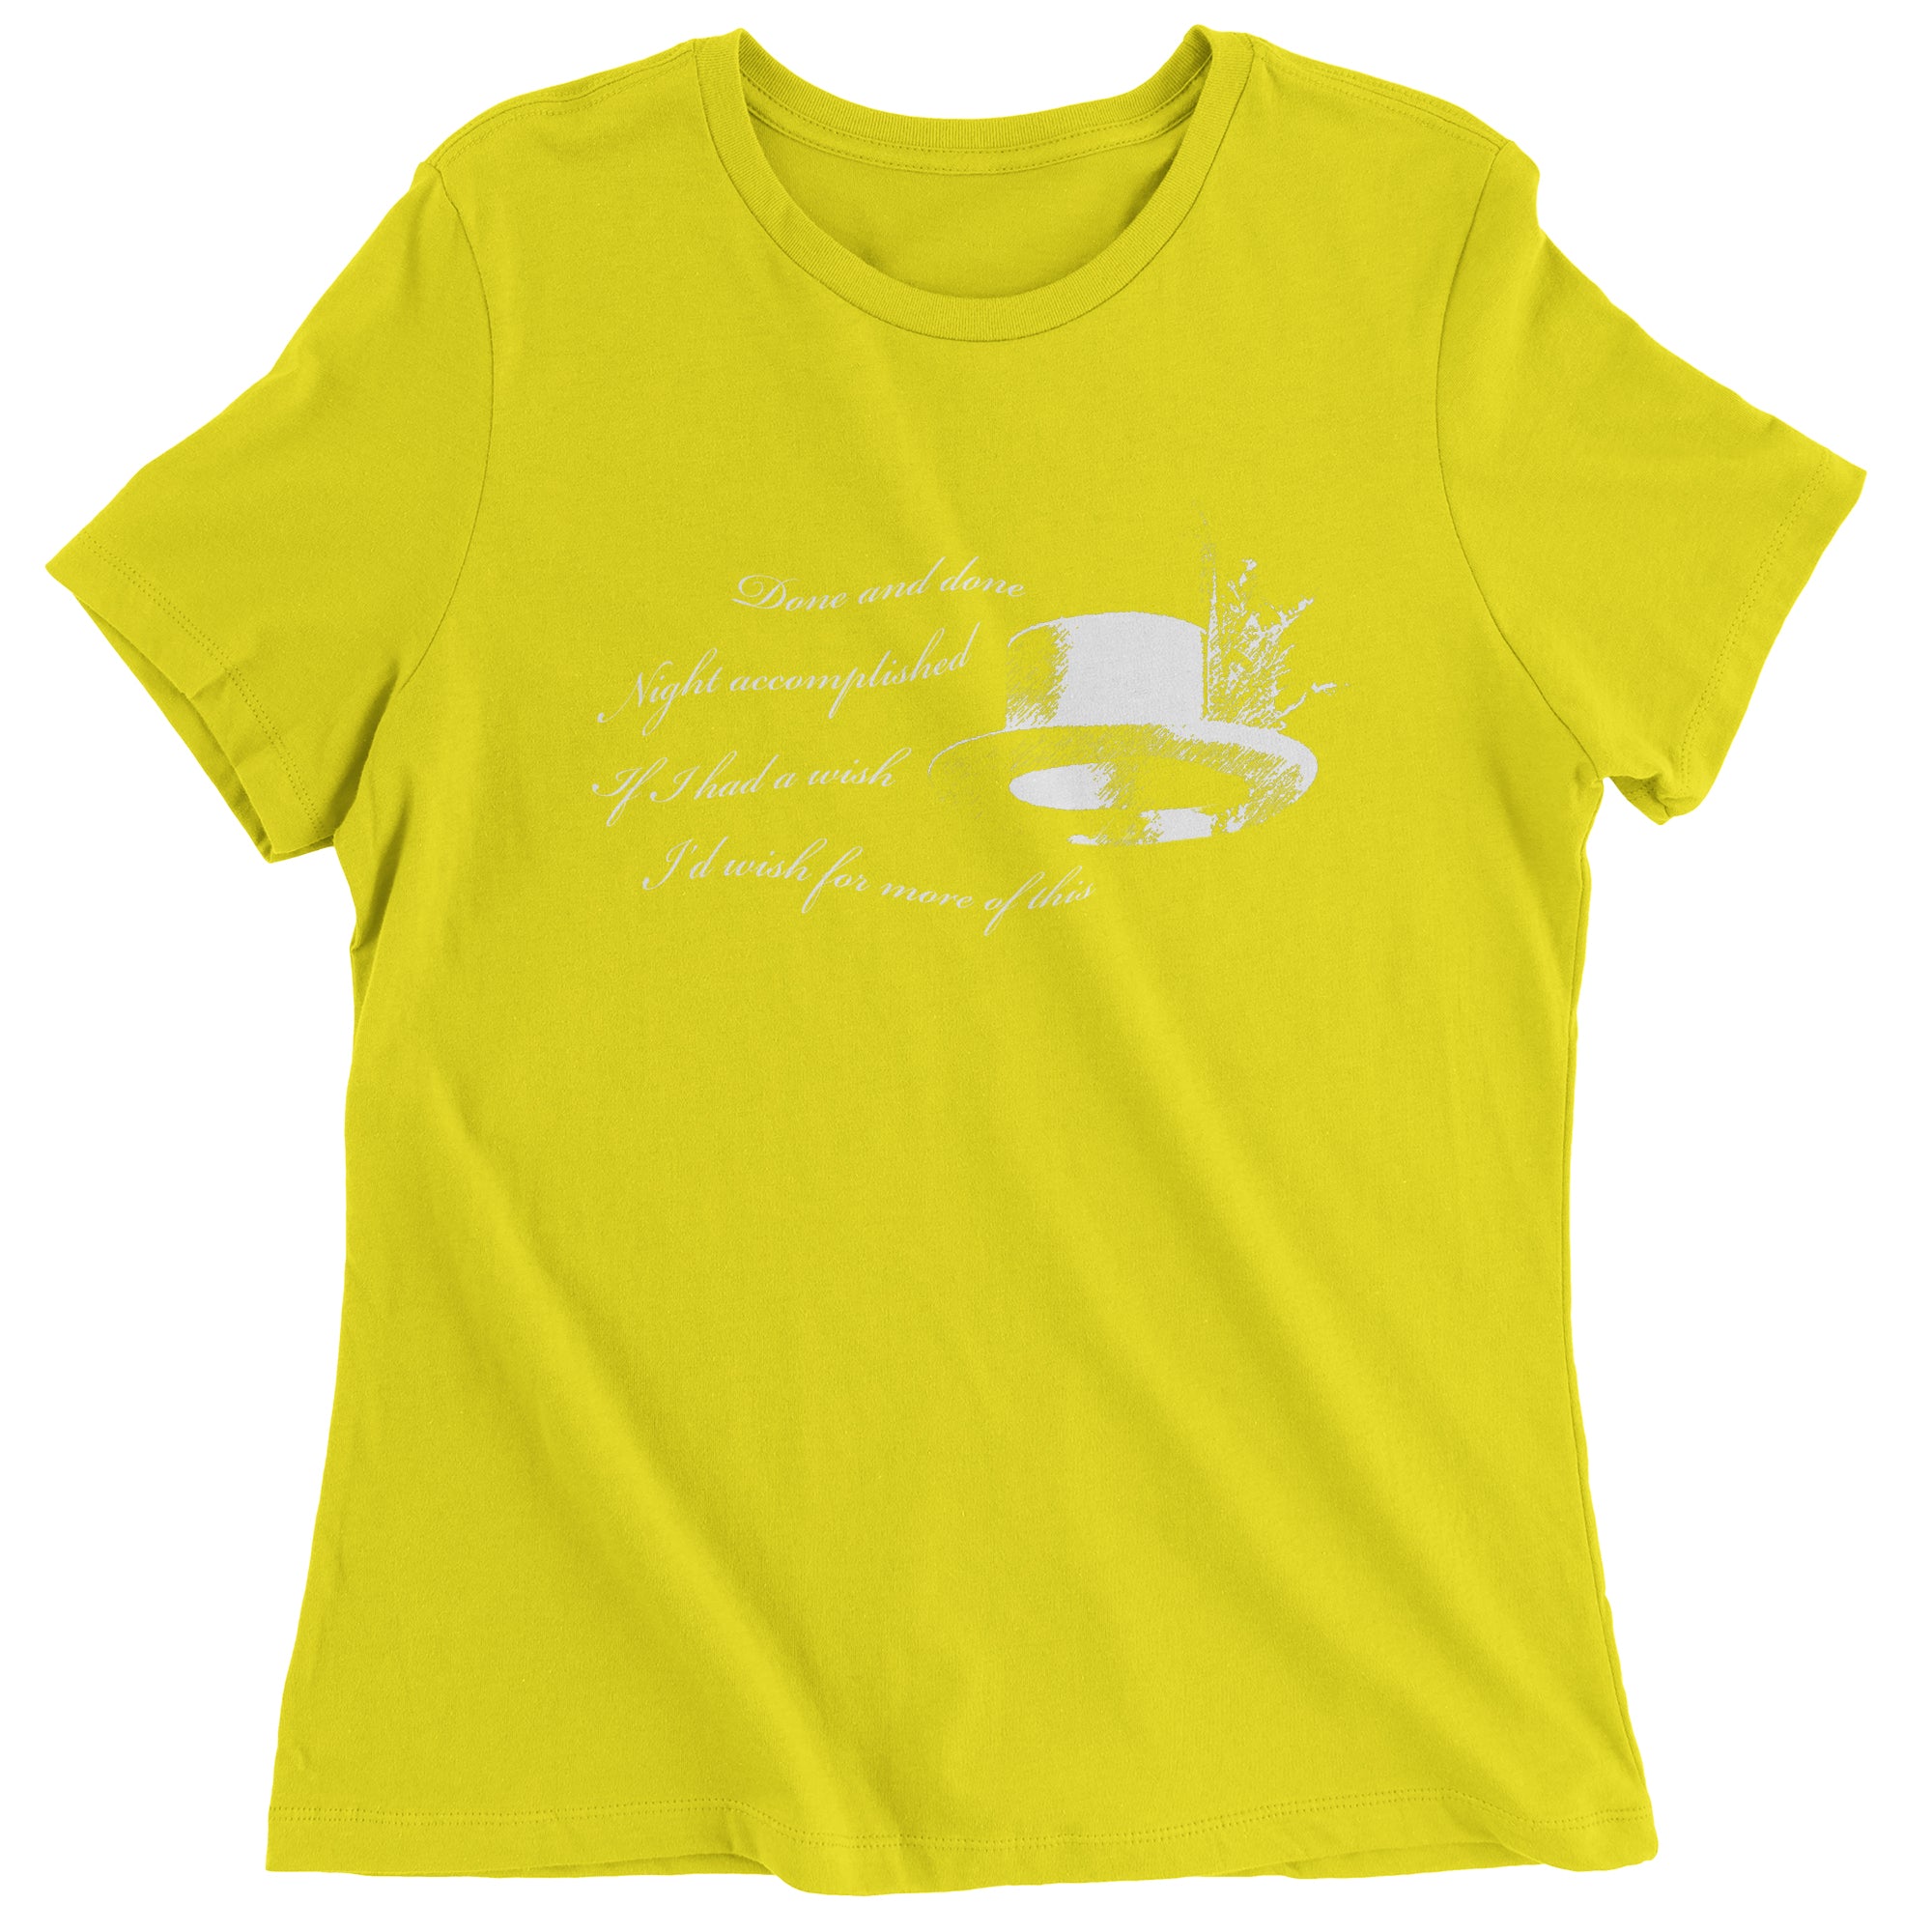 Done and Done Women's T-Shirt